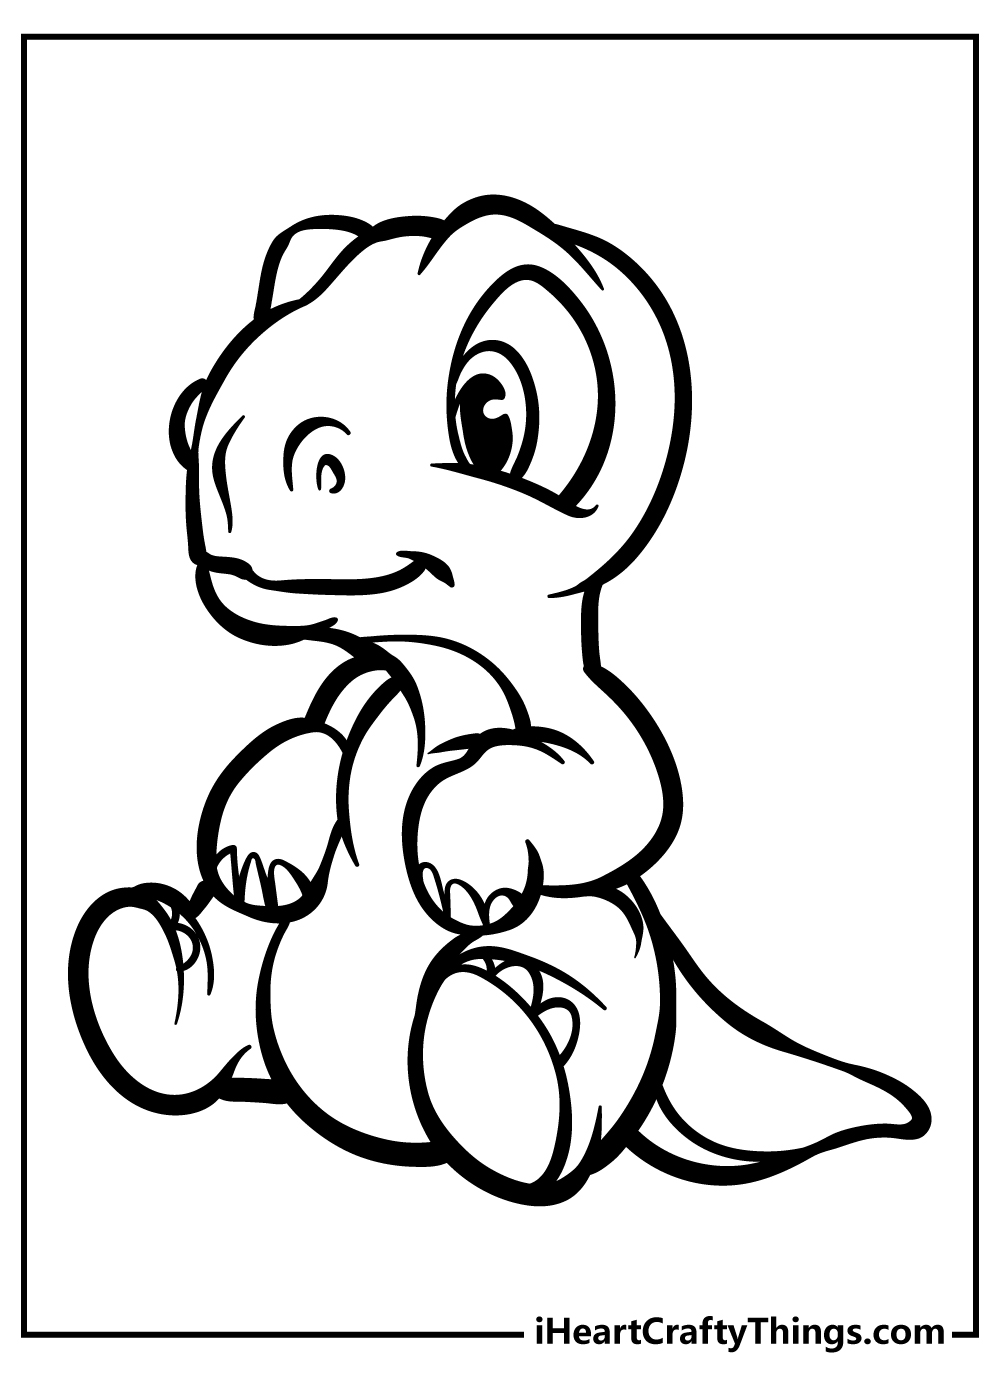 How To Draw A Baby Dinosaur, Step by Step, Drawing Guide, by Dawn - DragoArt